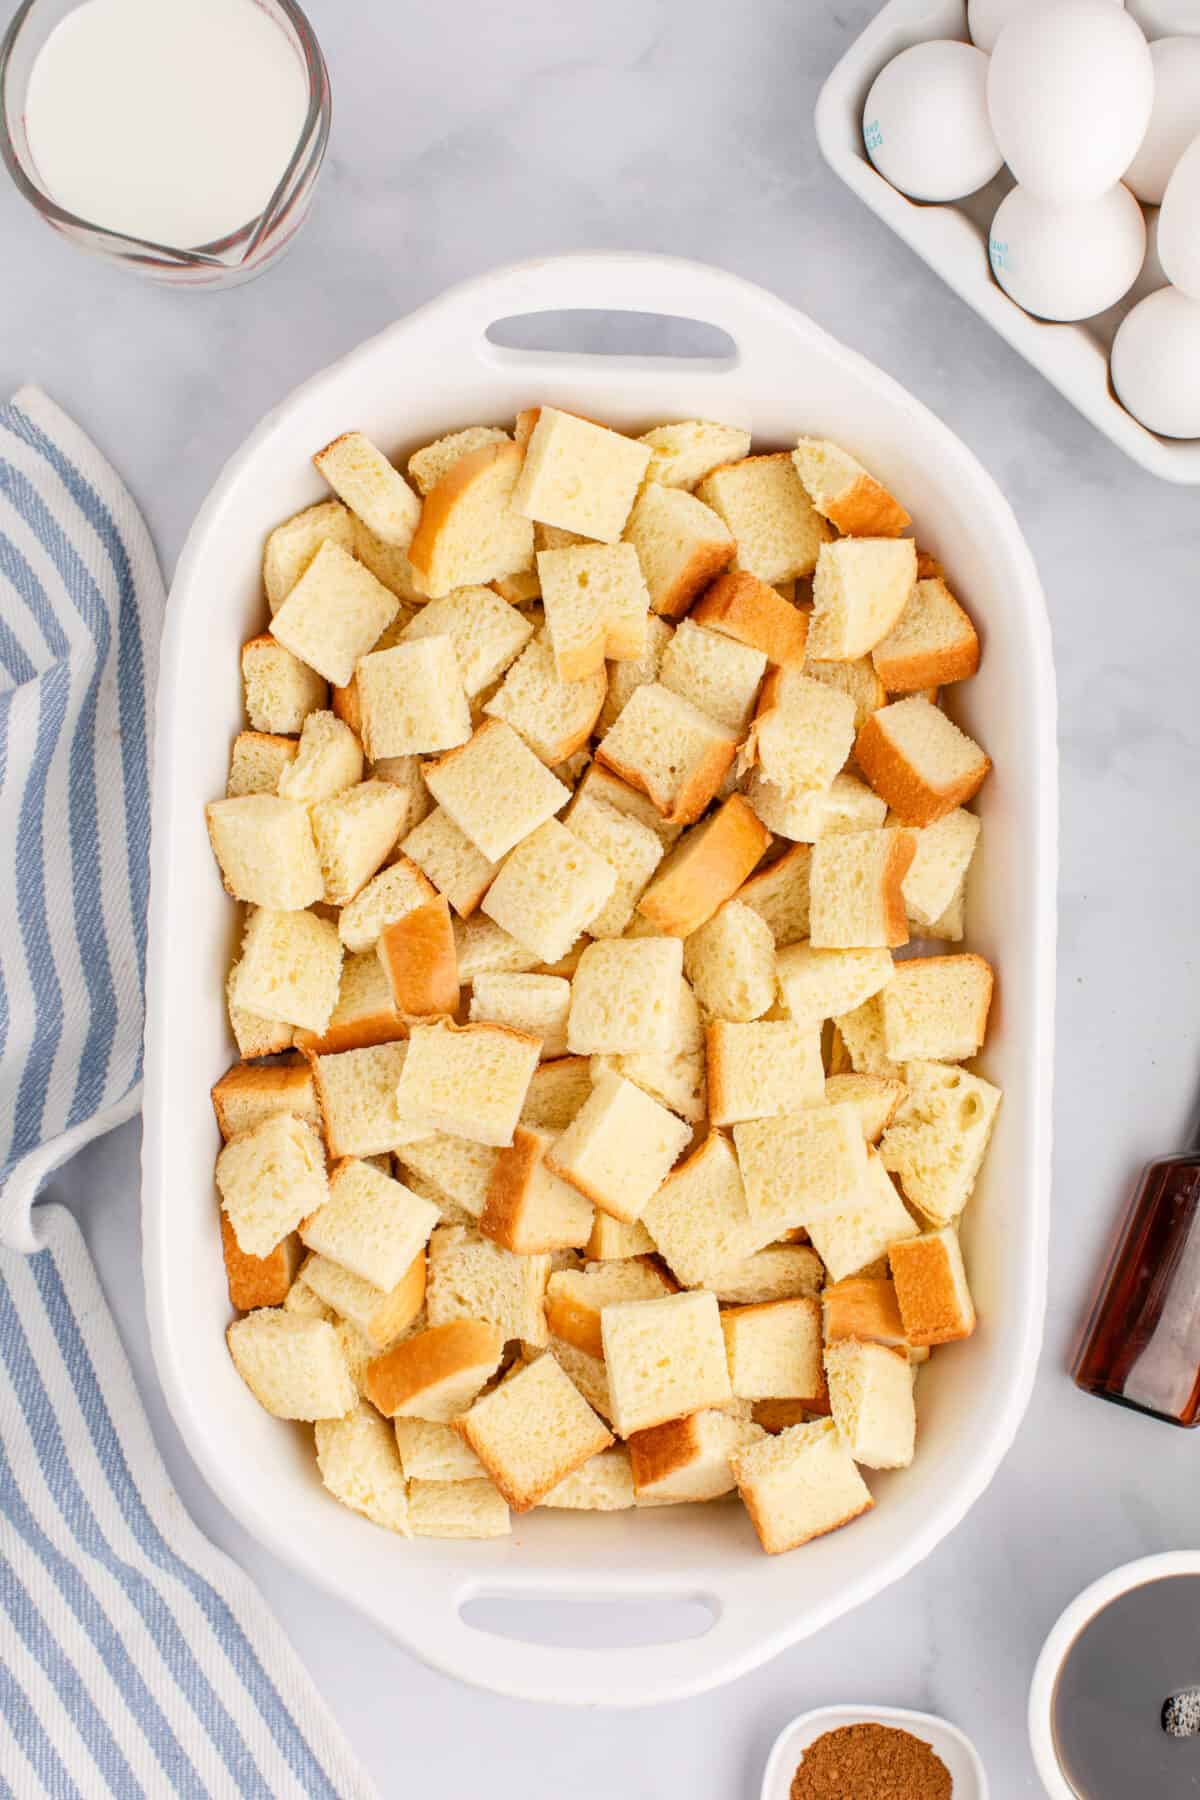 cubes of bread cut up in a casserole dish. 